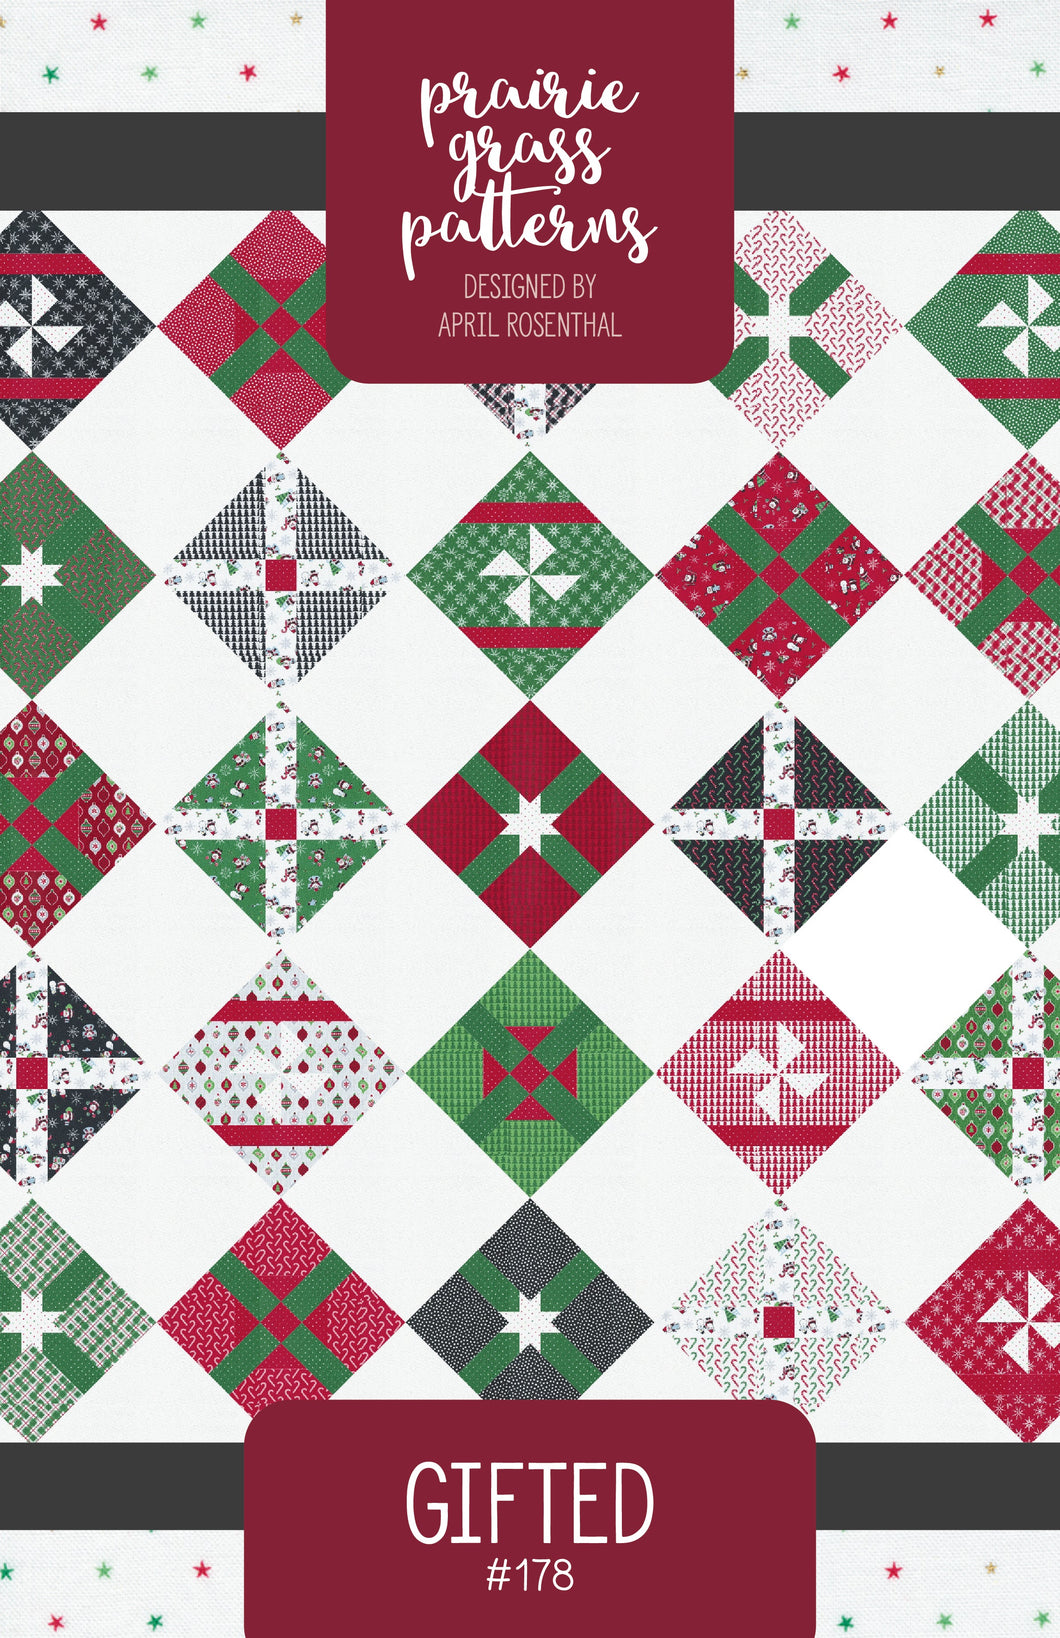 #178 - Gifted PDF Pattern